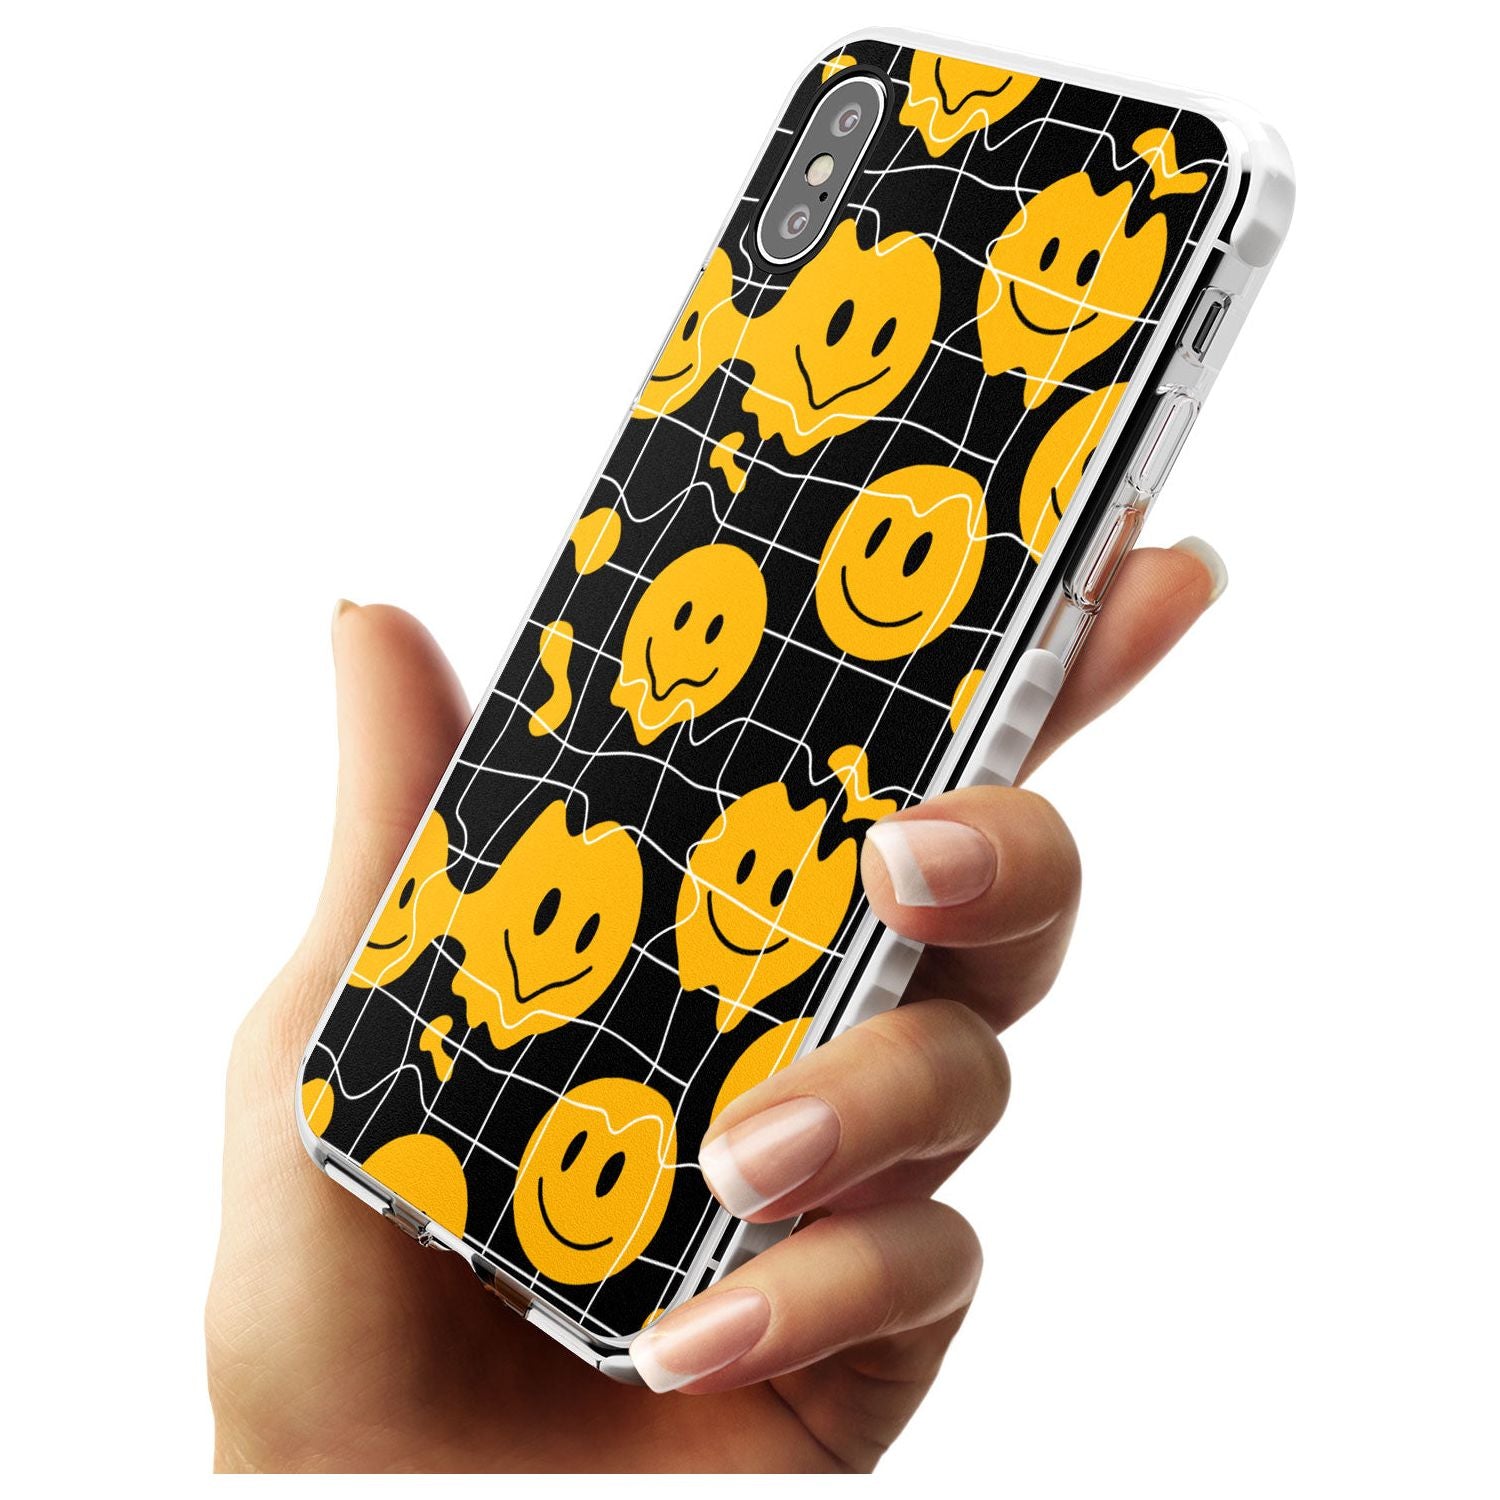 Acid Face Grid Pattern Impact Phone Case for iPhone X XS Max XR